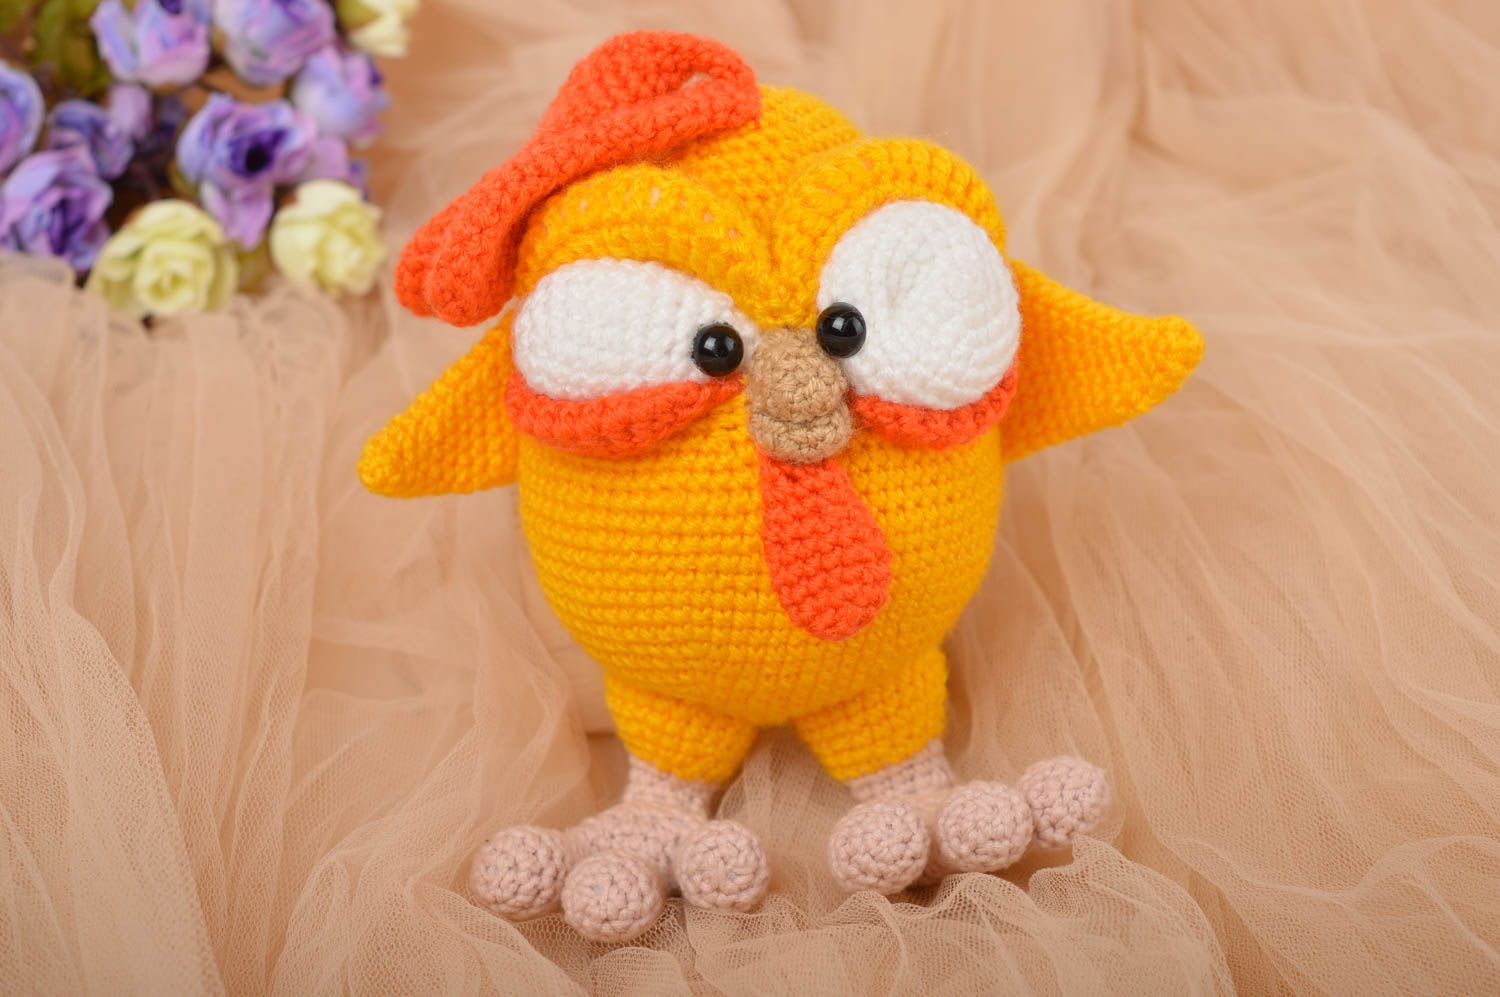 Cute toy hand-crocheted toys for children handmade stuffed toys for babies photo 1